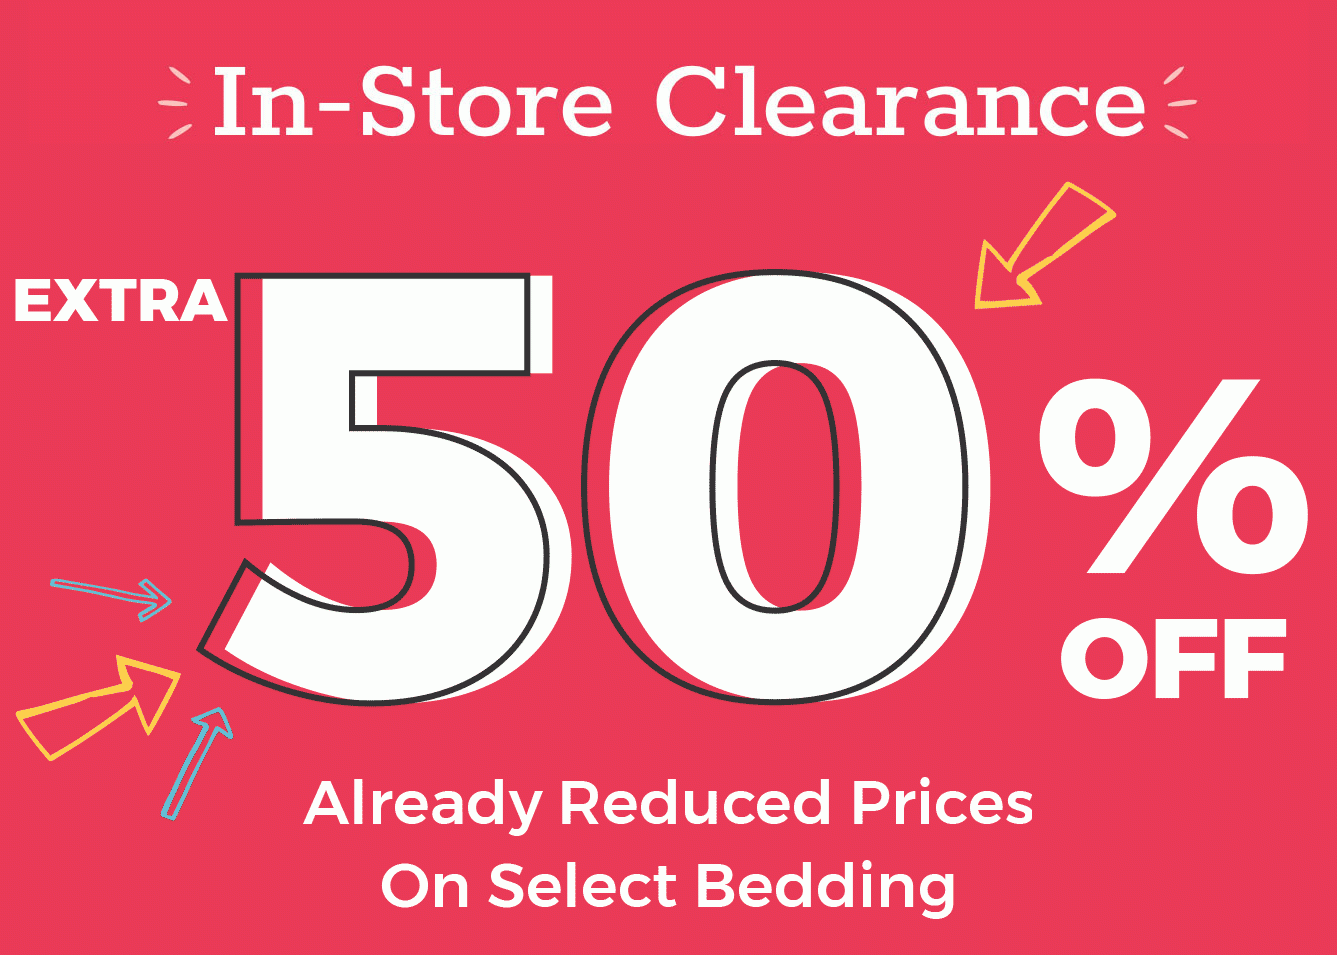 In-Store Clearance. EXTRA 50% OFF Already Reduced Prices On Select Bedding